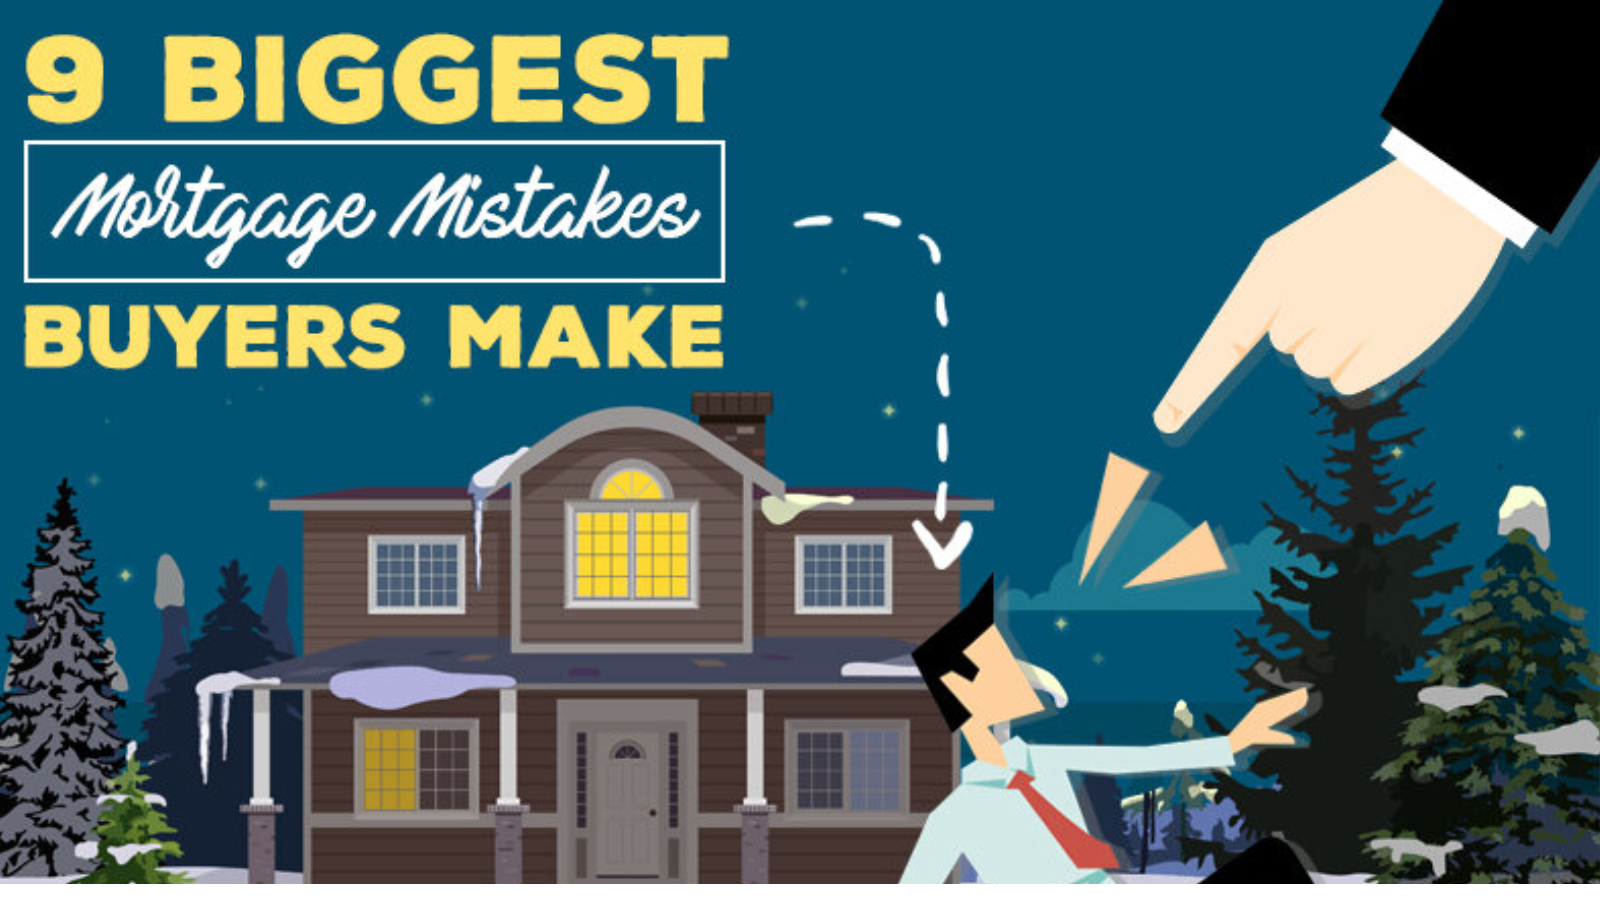 9 Biggest Mortgage Mistakes Buyers Make